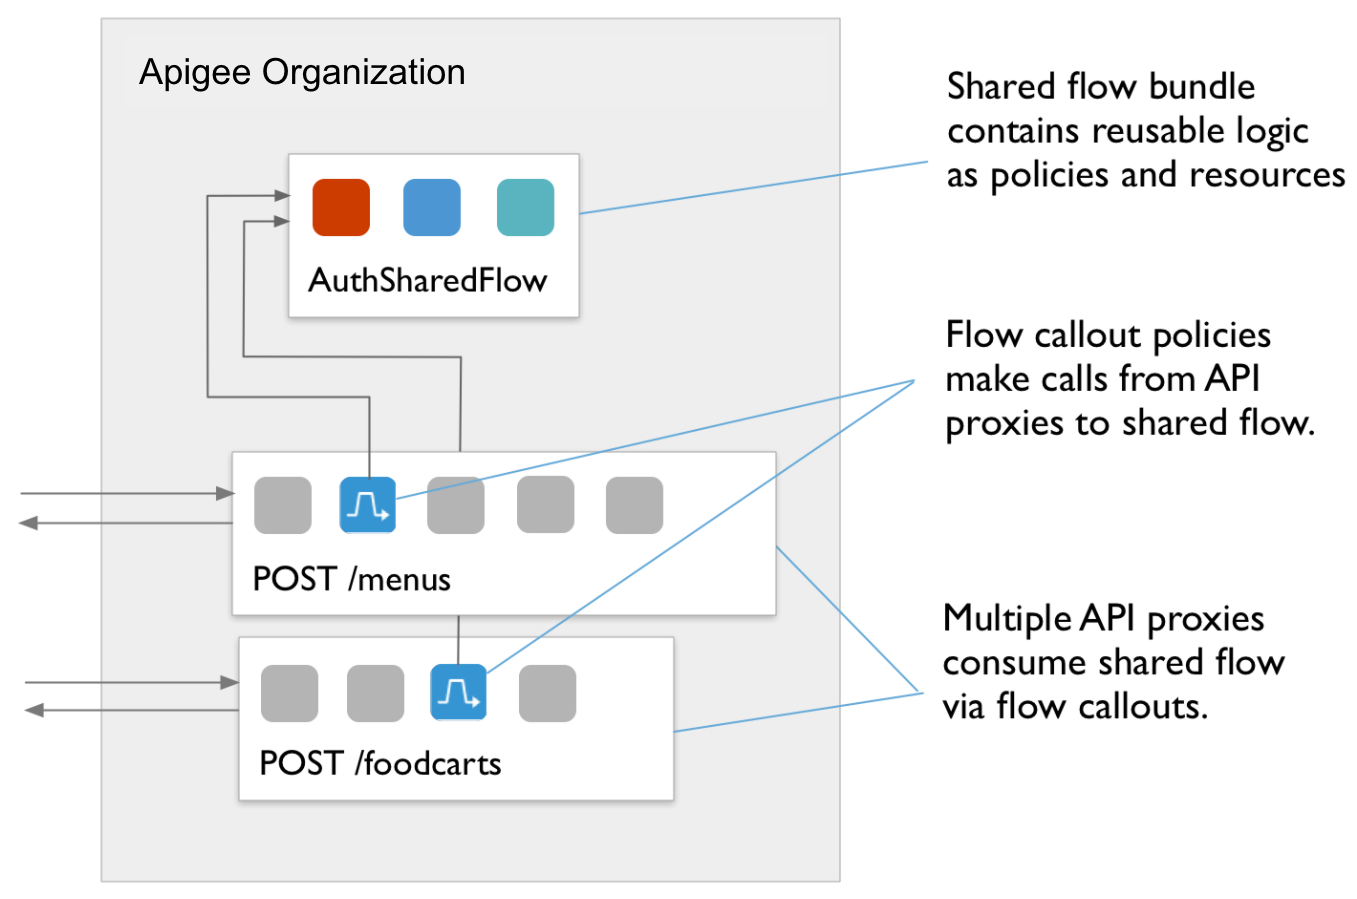 Flow diagram showing POST /foodcarts policy to POST /menus policy to AuthSharedFlow.
          Callout text:
          a) Multiple API proxies consume shared flow via FlowCallouts.
          b)FlowCallout policies make calls from API proxies to shared flow.
          c) Shared flow bundle contains reusable logic as policies and resources.